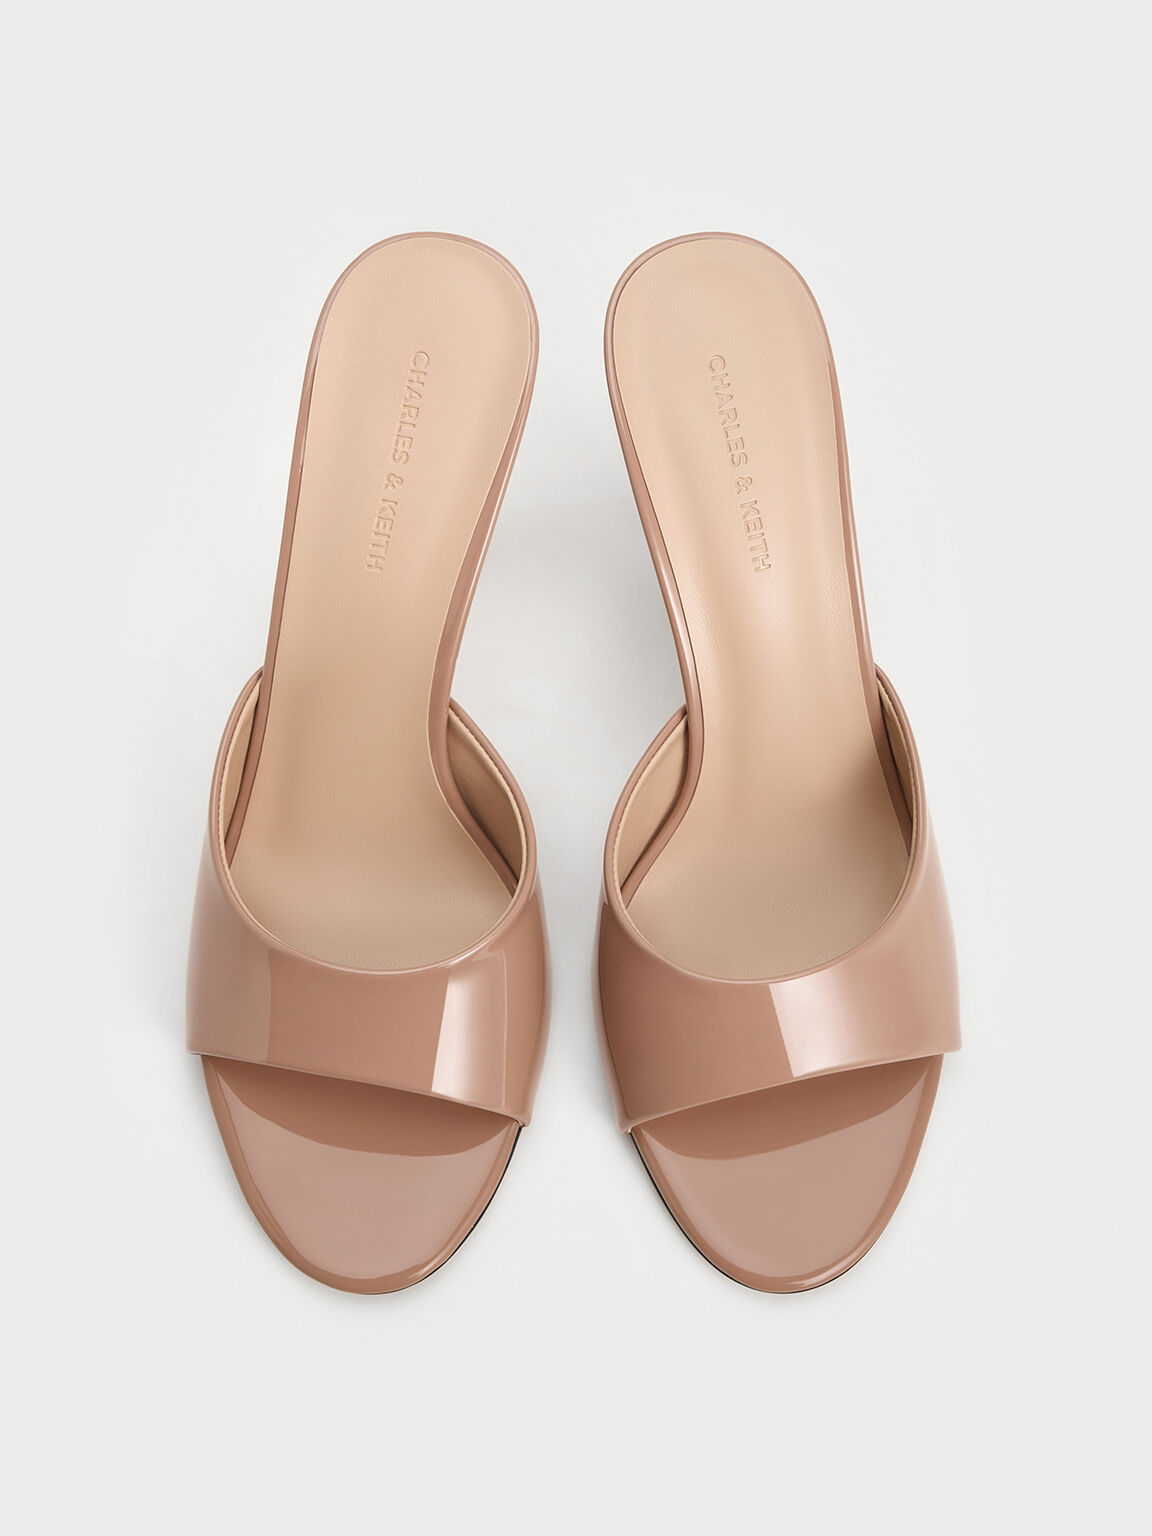 Nude Patent Open-Toe Heeled Mules - CHARLES & KEITH US